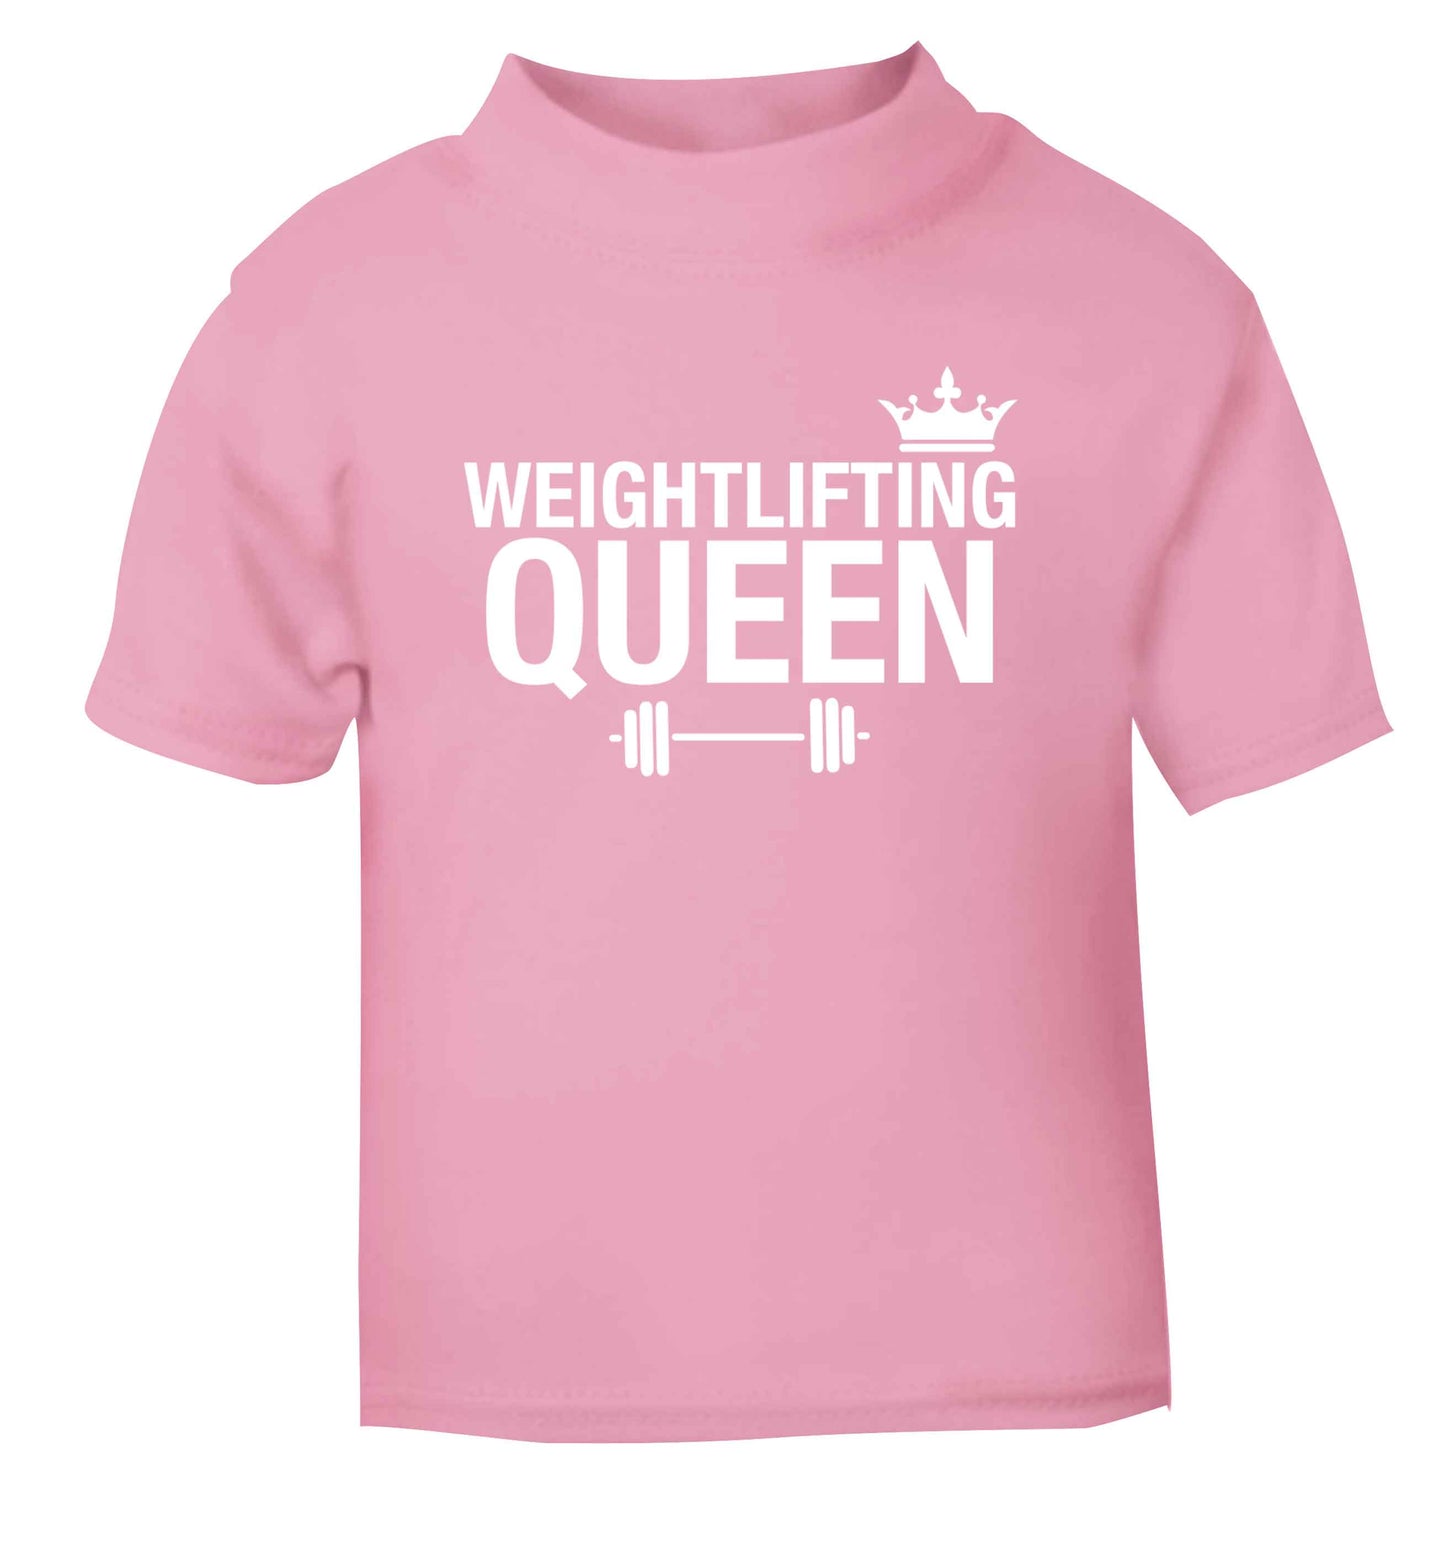 Weightlifting Queen light pink Baby Toddler Tshirt 2 Years